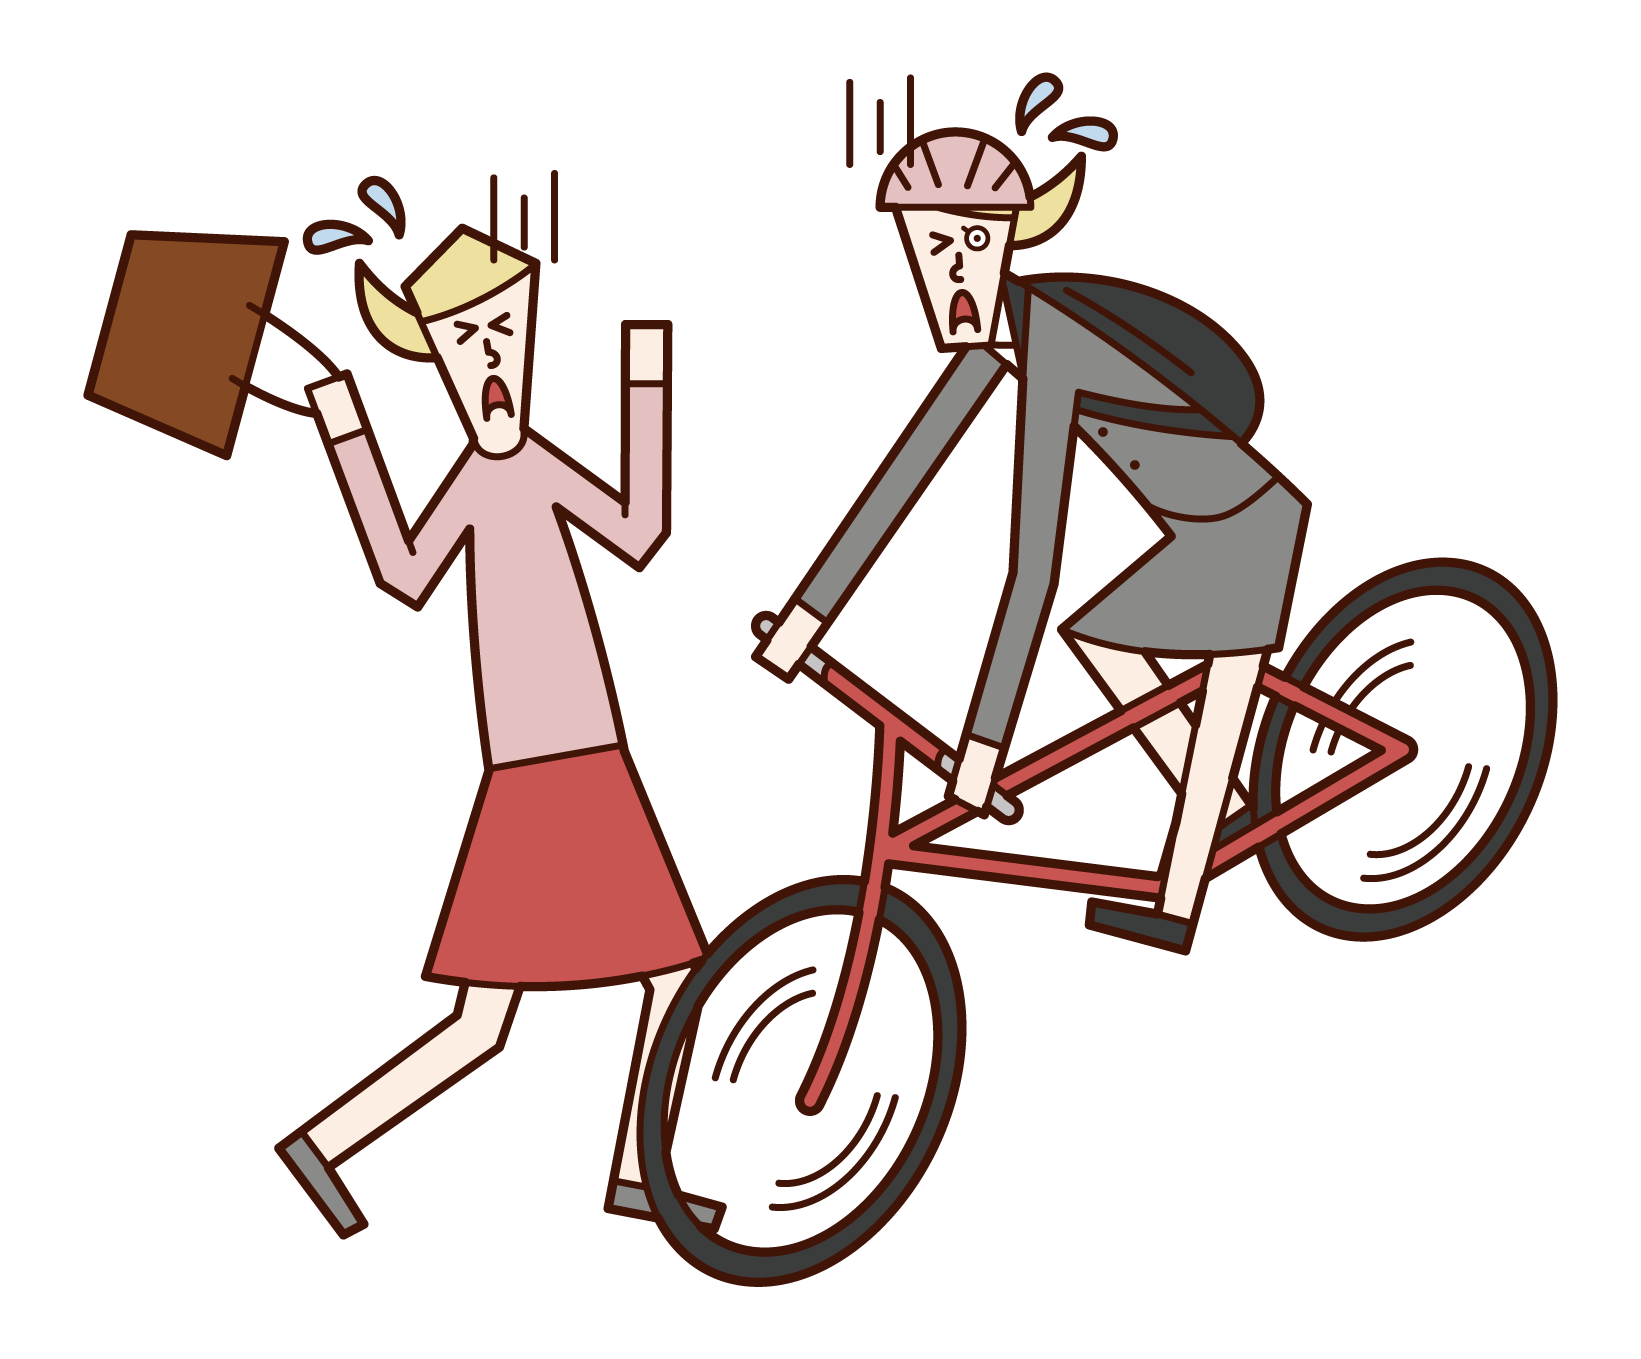 Illustration of a woman causing a crash on a bicycle